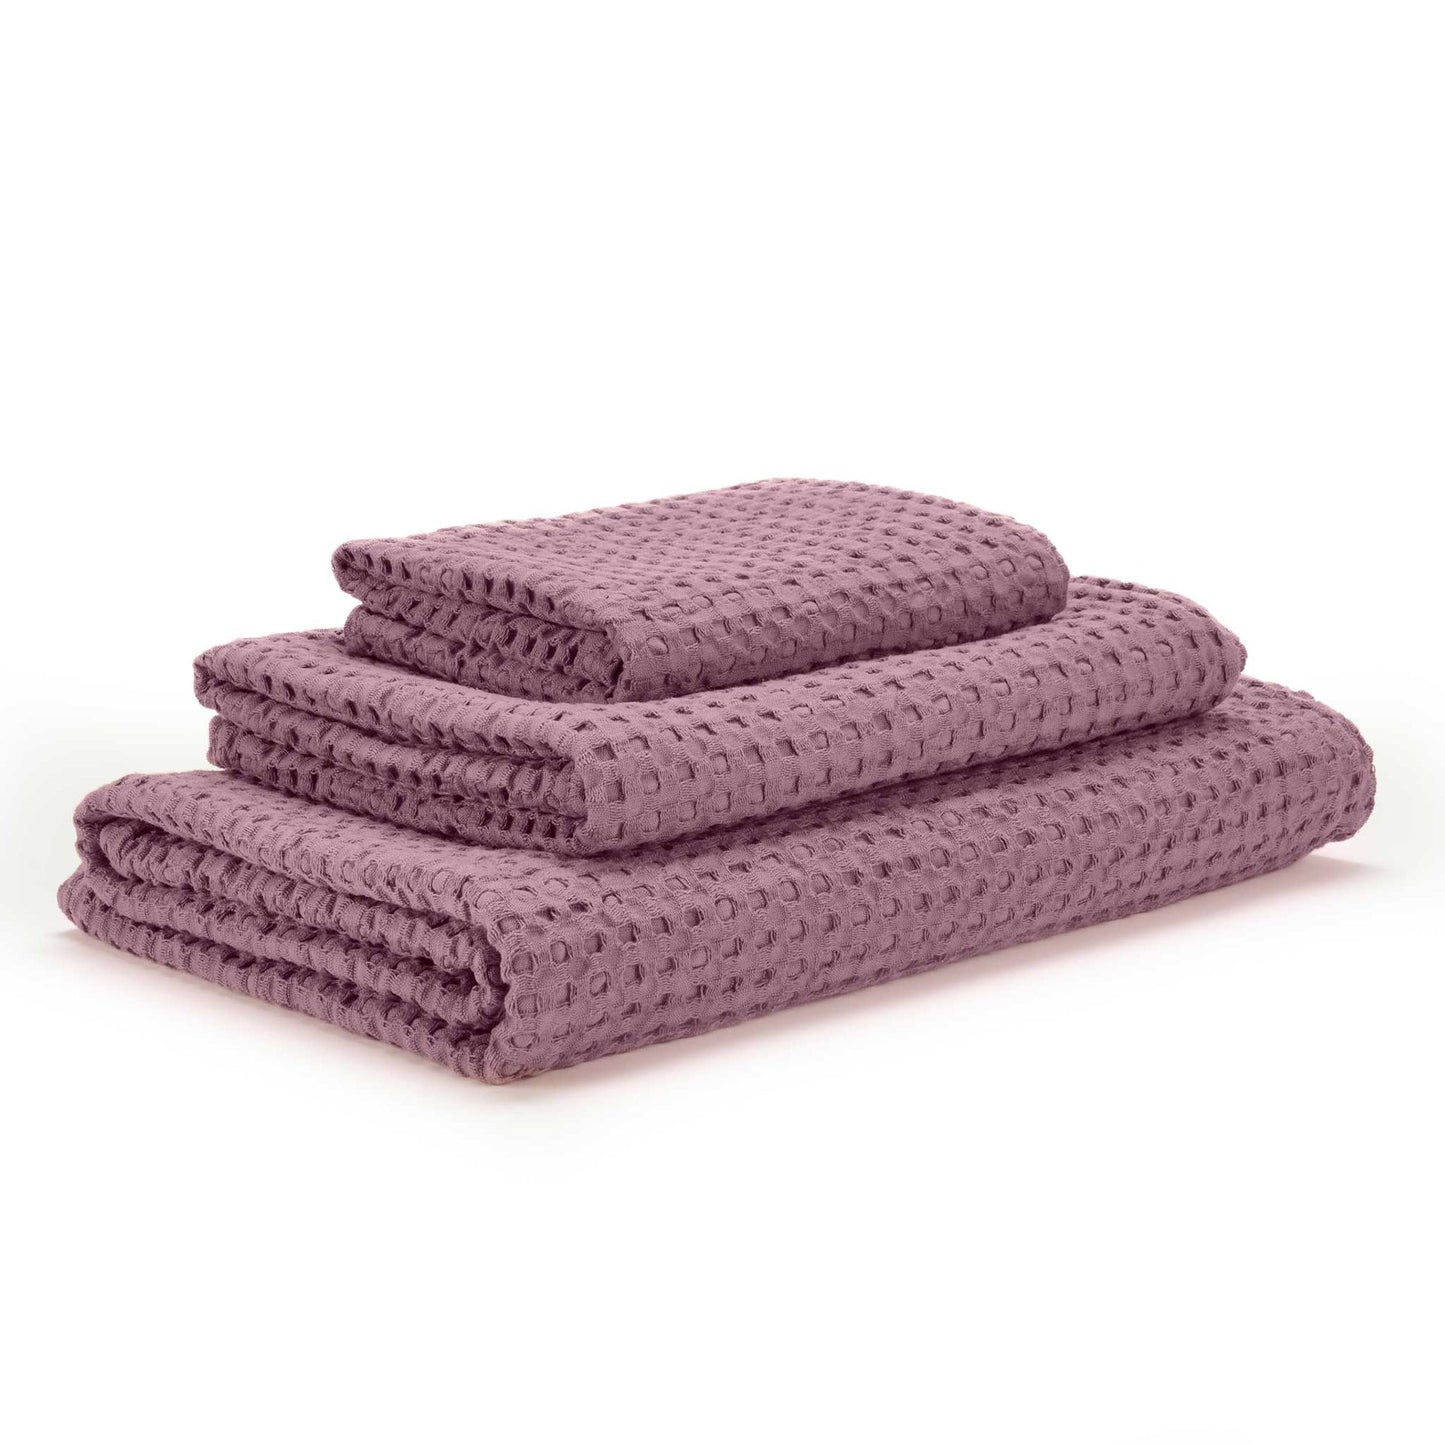 Pousada Egyptian Waffle Design cotton towels - 440 Orchid - |VESIMI Design| Luxury and Rustic bathrooms online